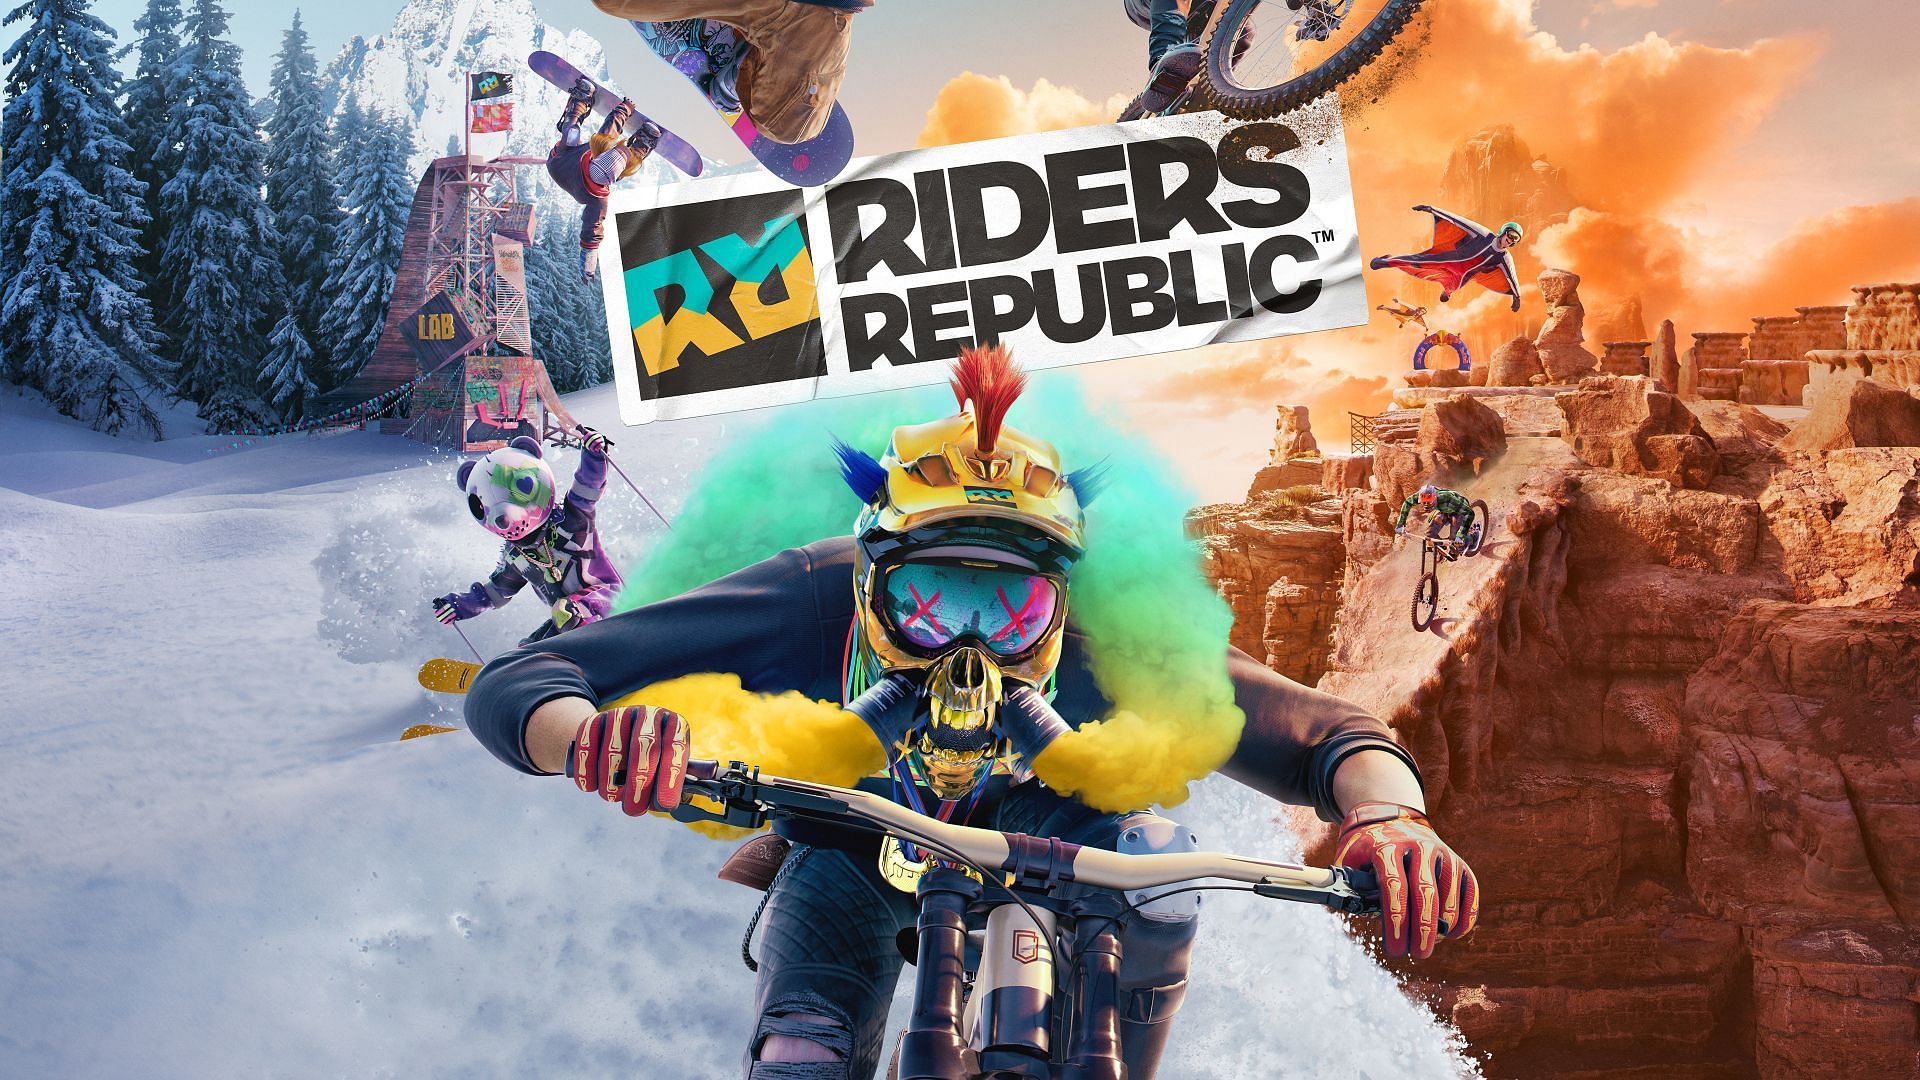 Drive, cycle, fly, ski and do tricks in this video game and come first before the time runs out. (Image via Ubisoft)